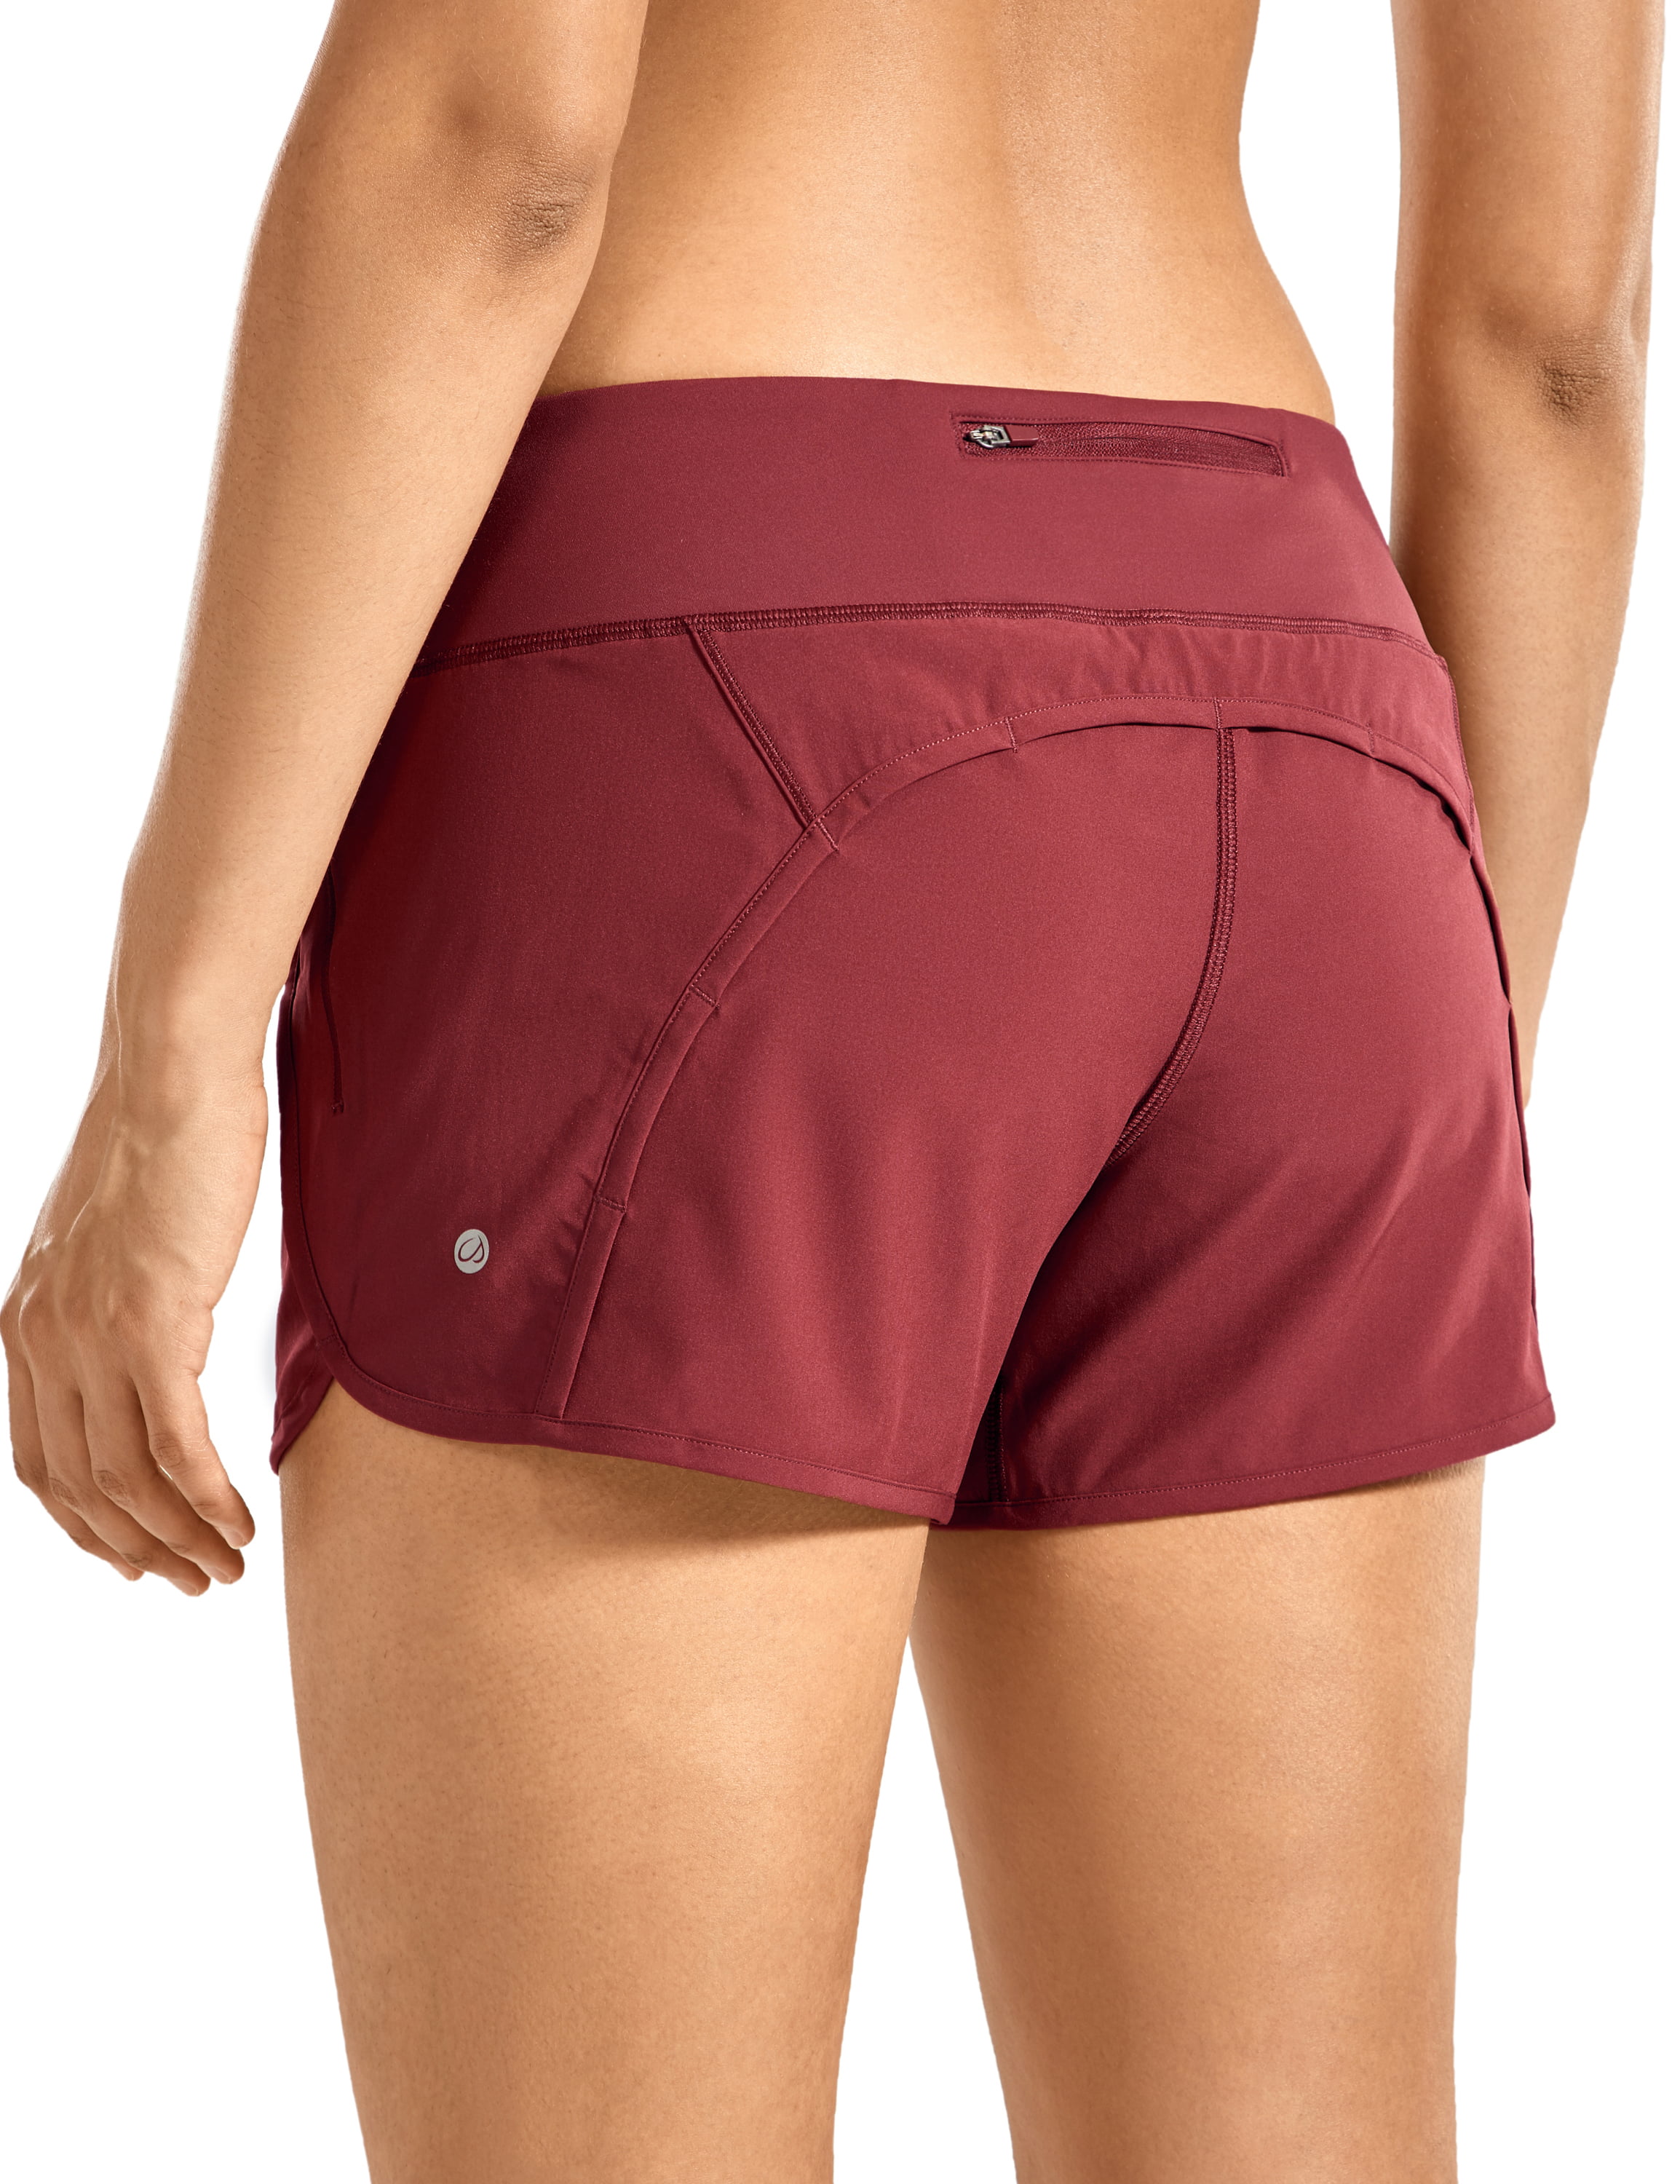 CRZ YOGA Women's Workout Sports Running Shorts Pants with Zip Pocket 4 Inches